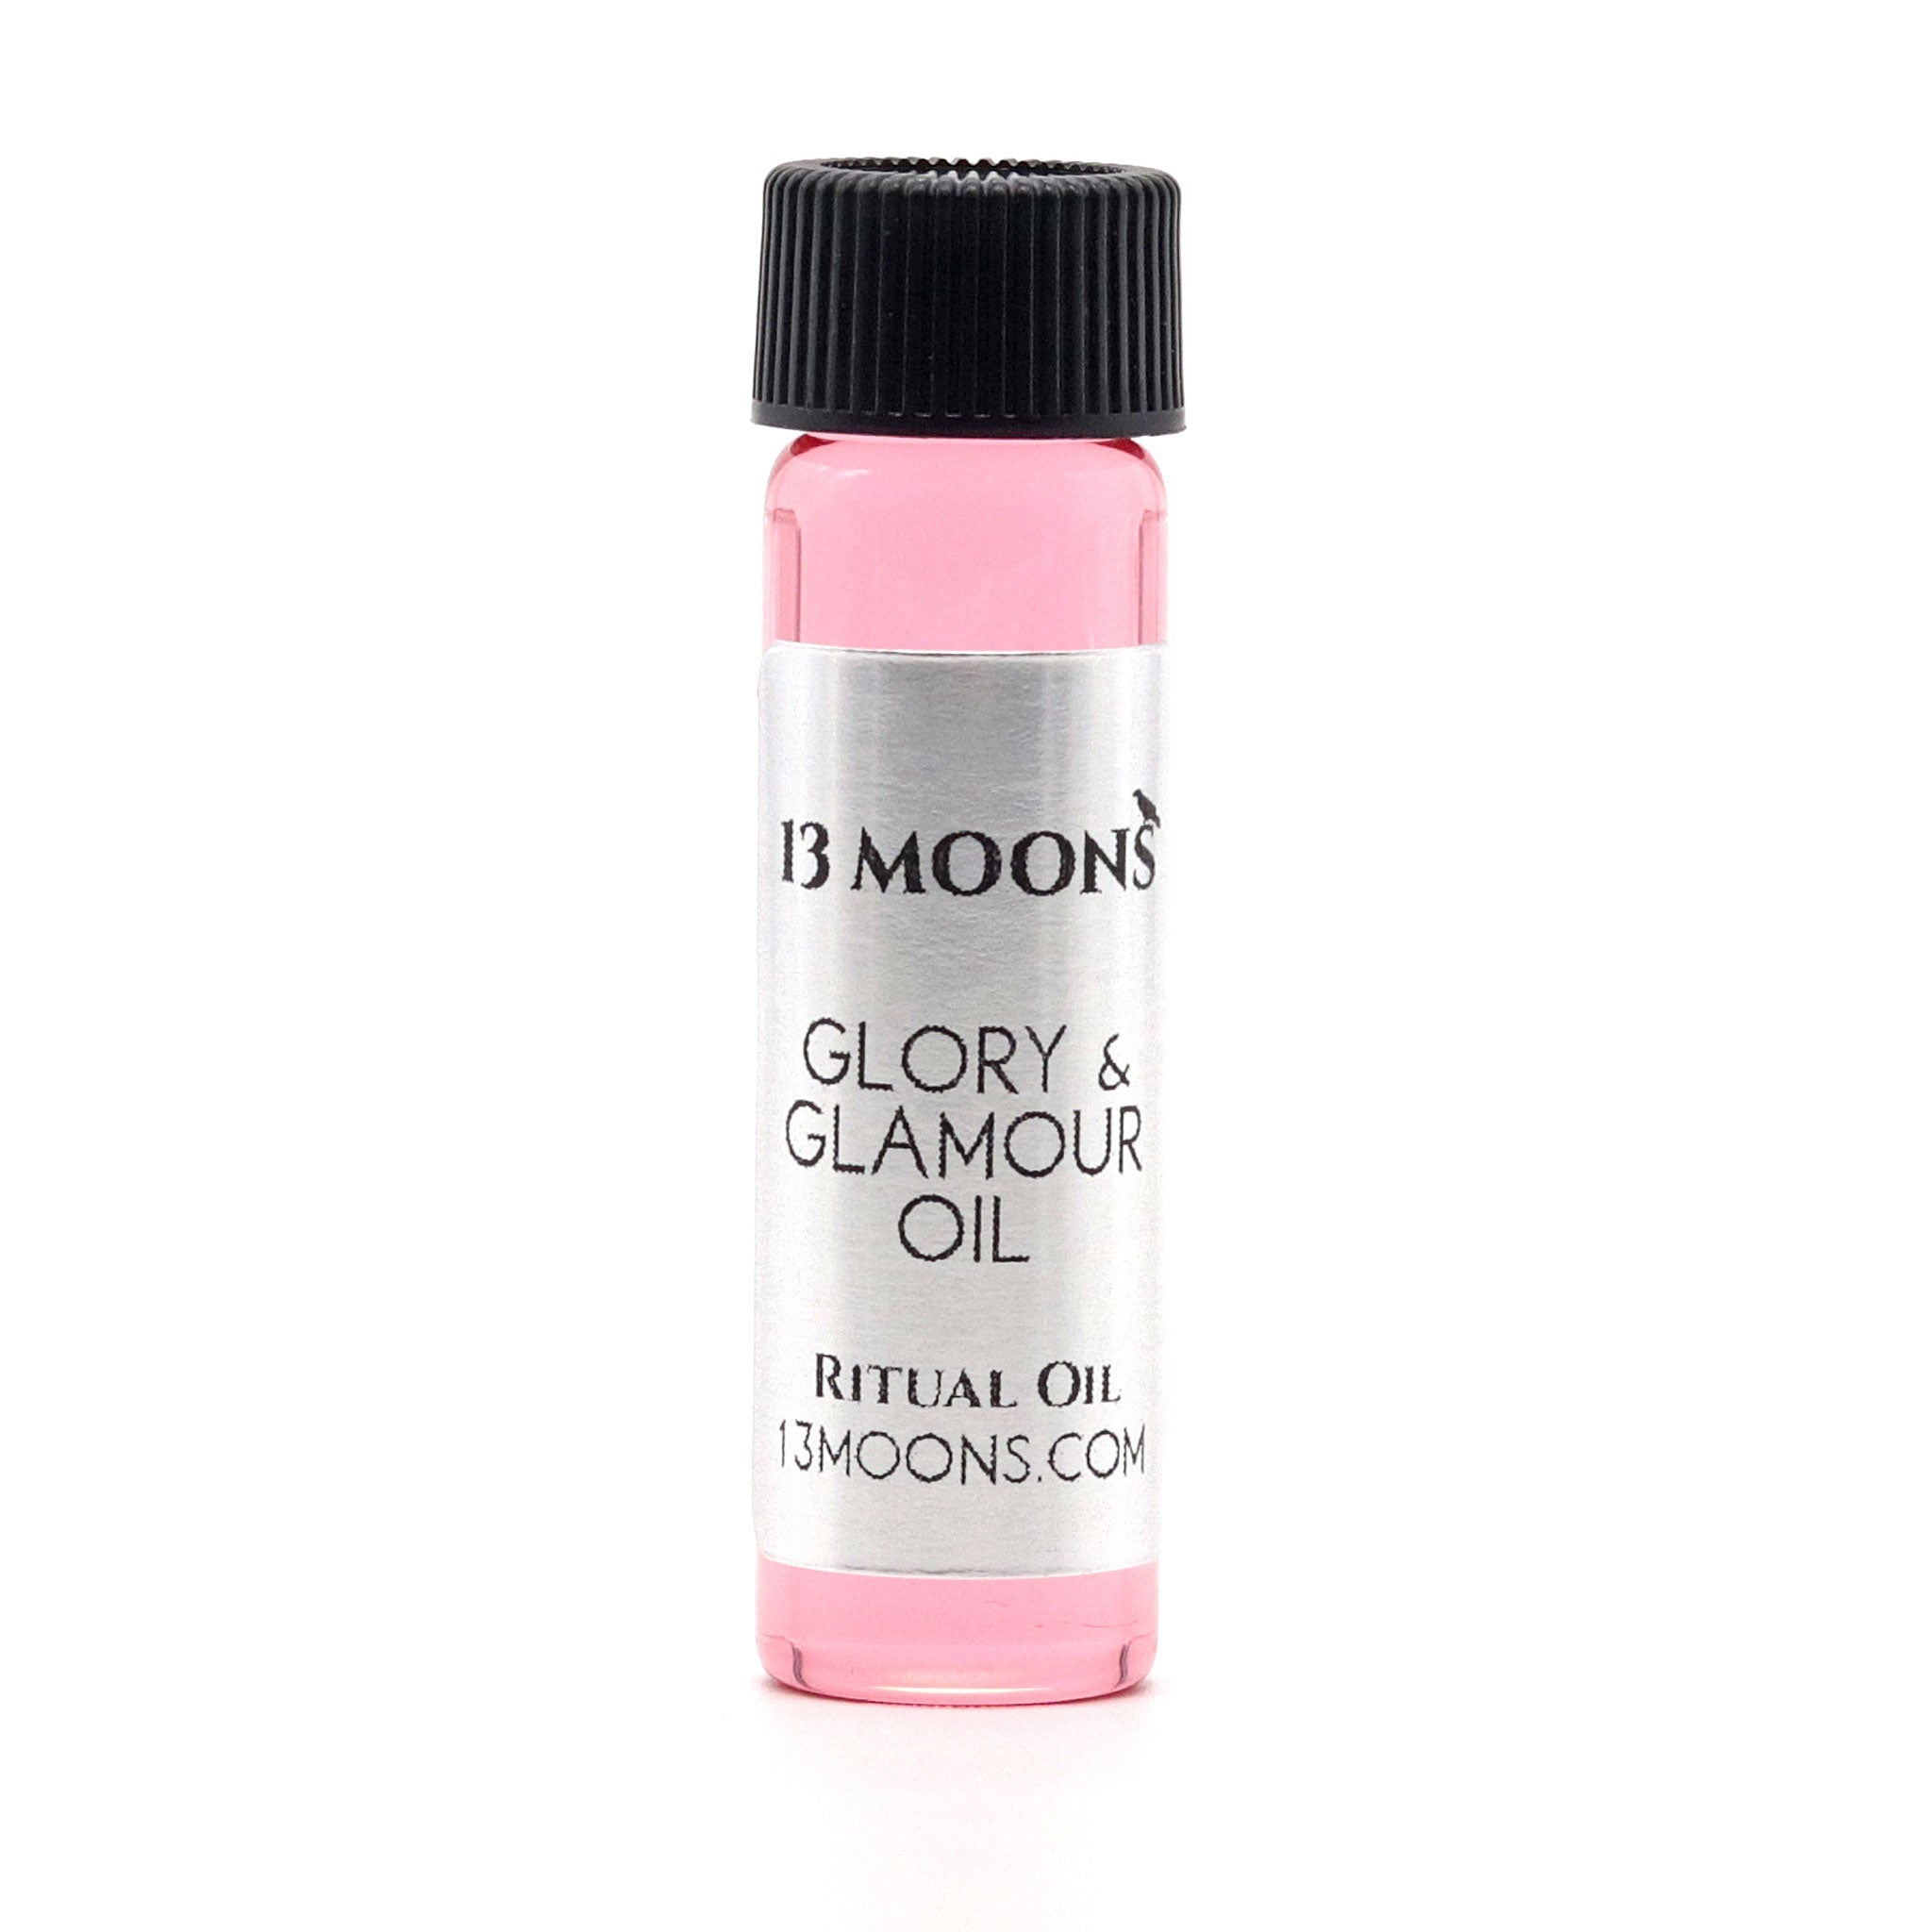 Glory & Glamour Oil by 13 Moons - 13 Moons